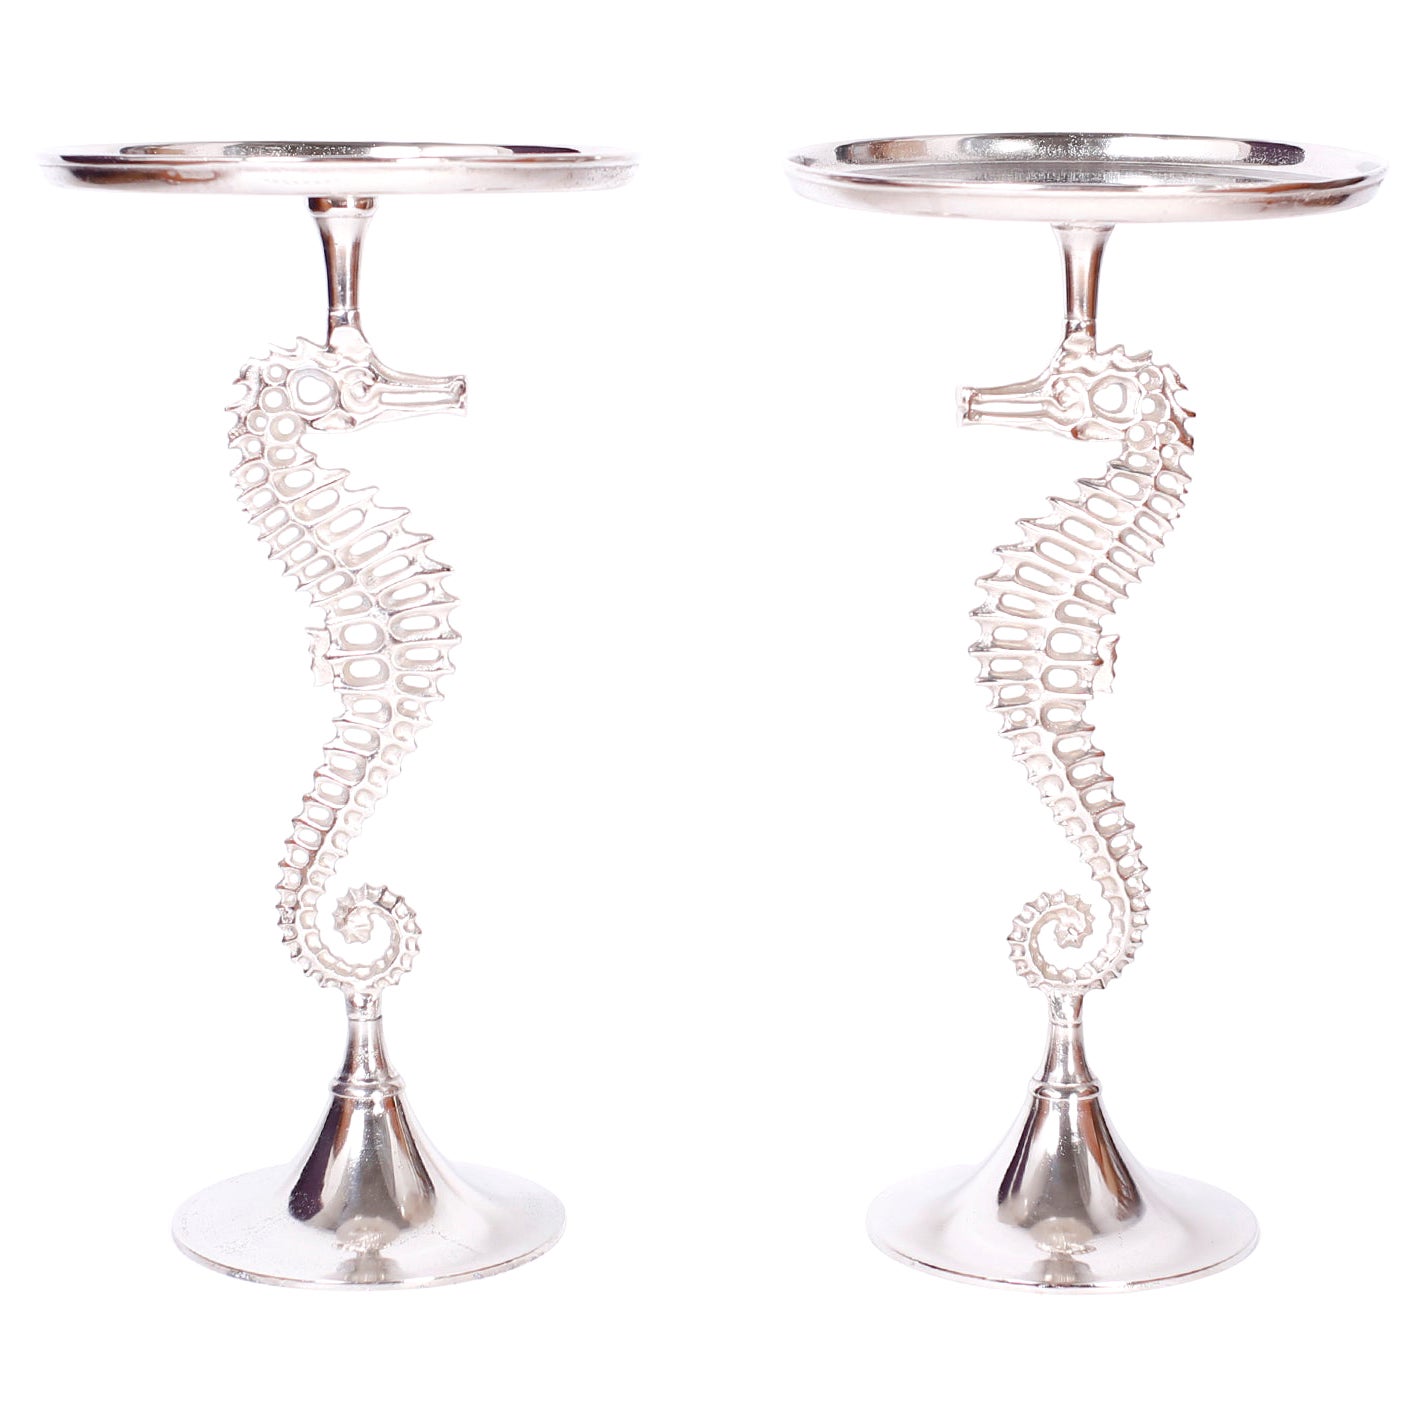 Pair of Seahorse Drink Stands or Tables For Sale